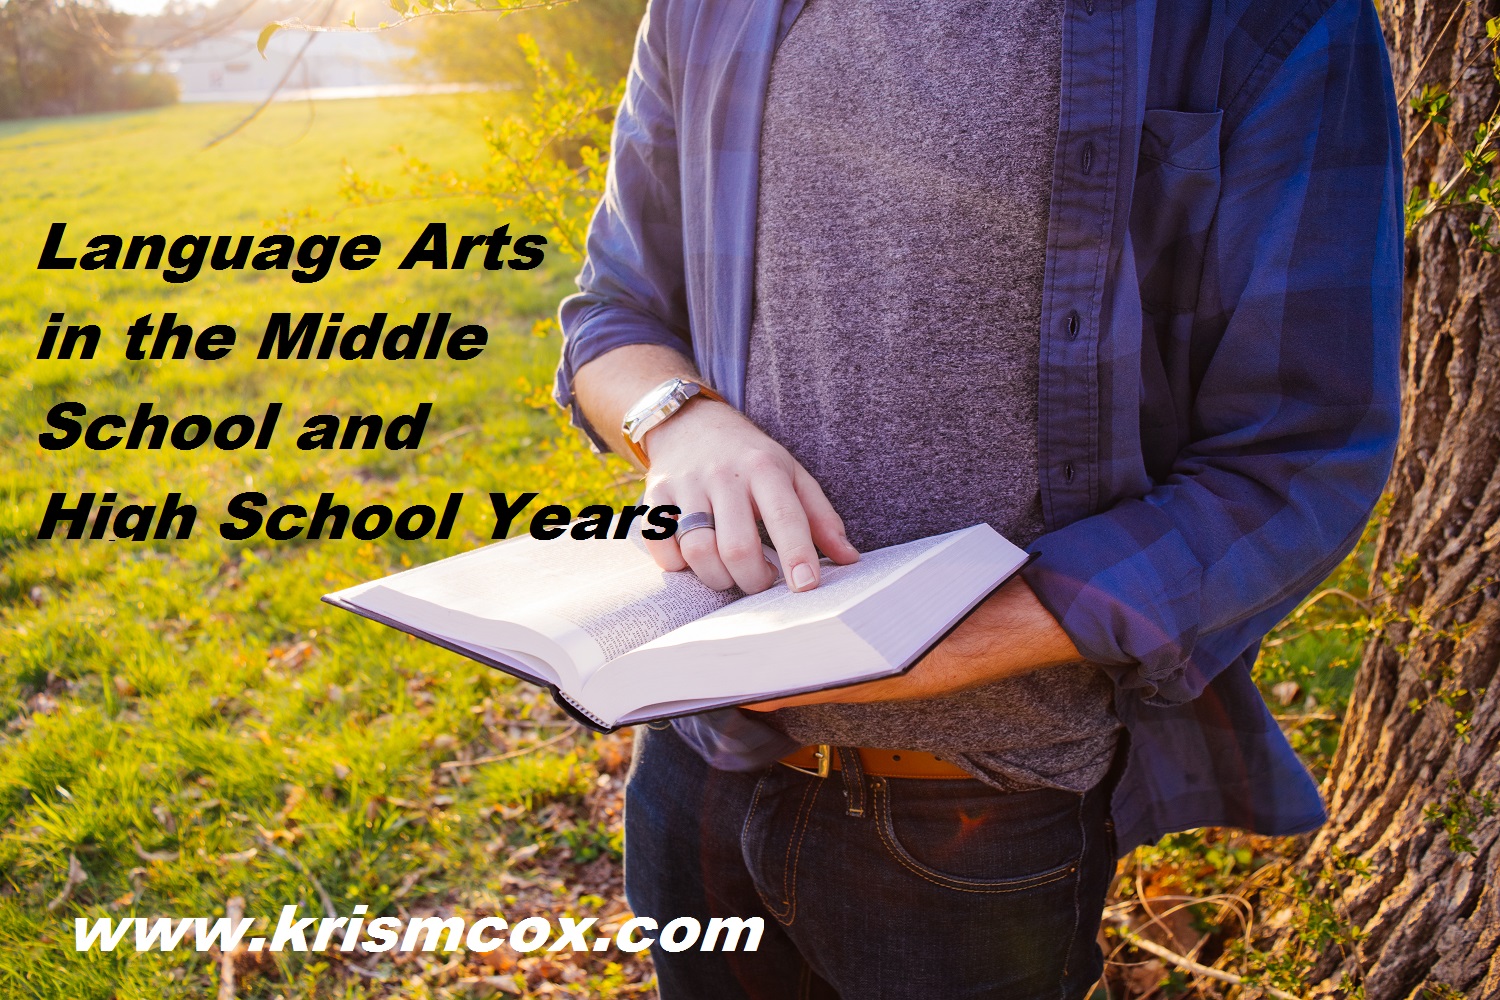 Language Arts in the Middle School and High School Years